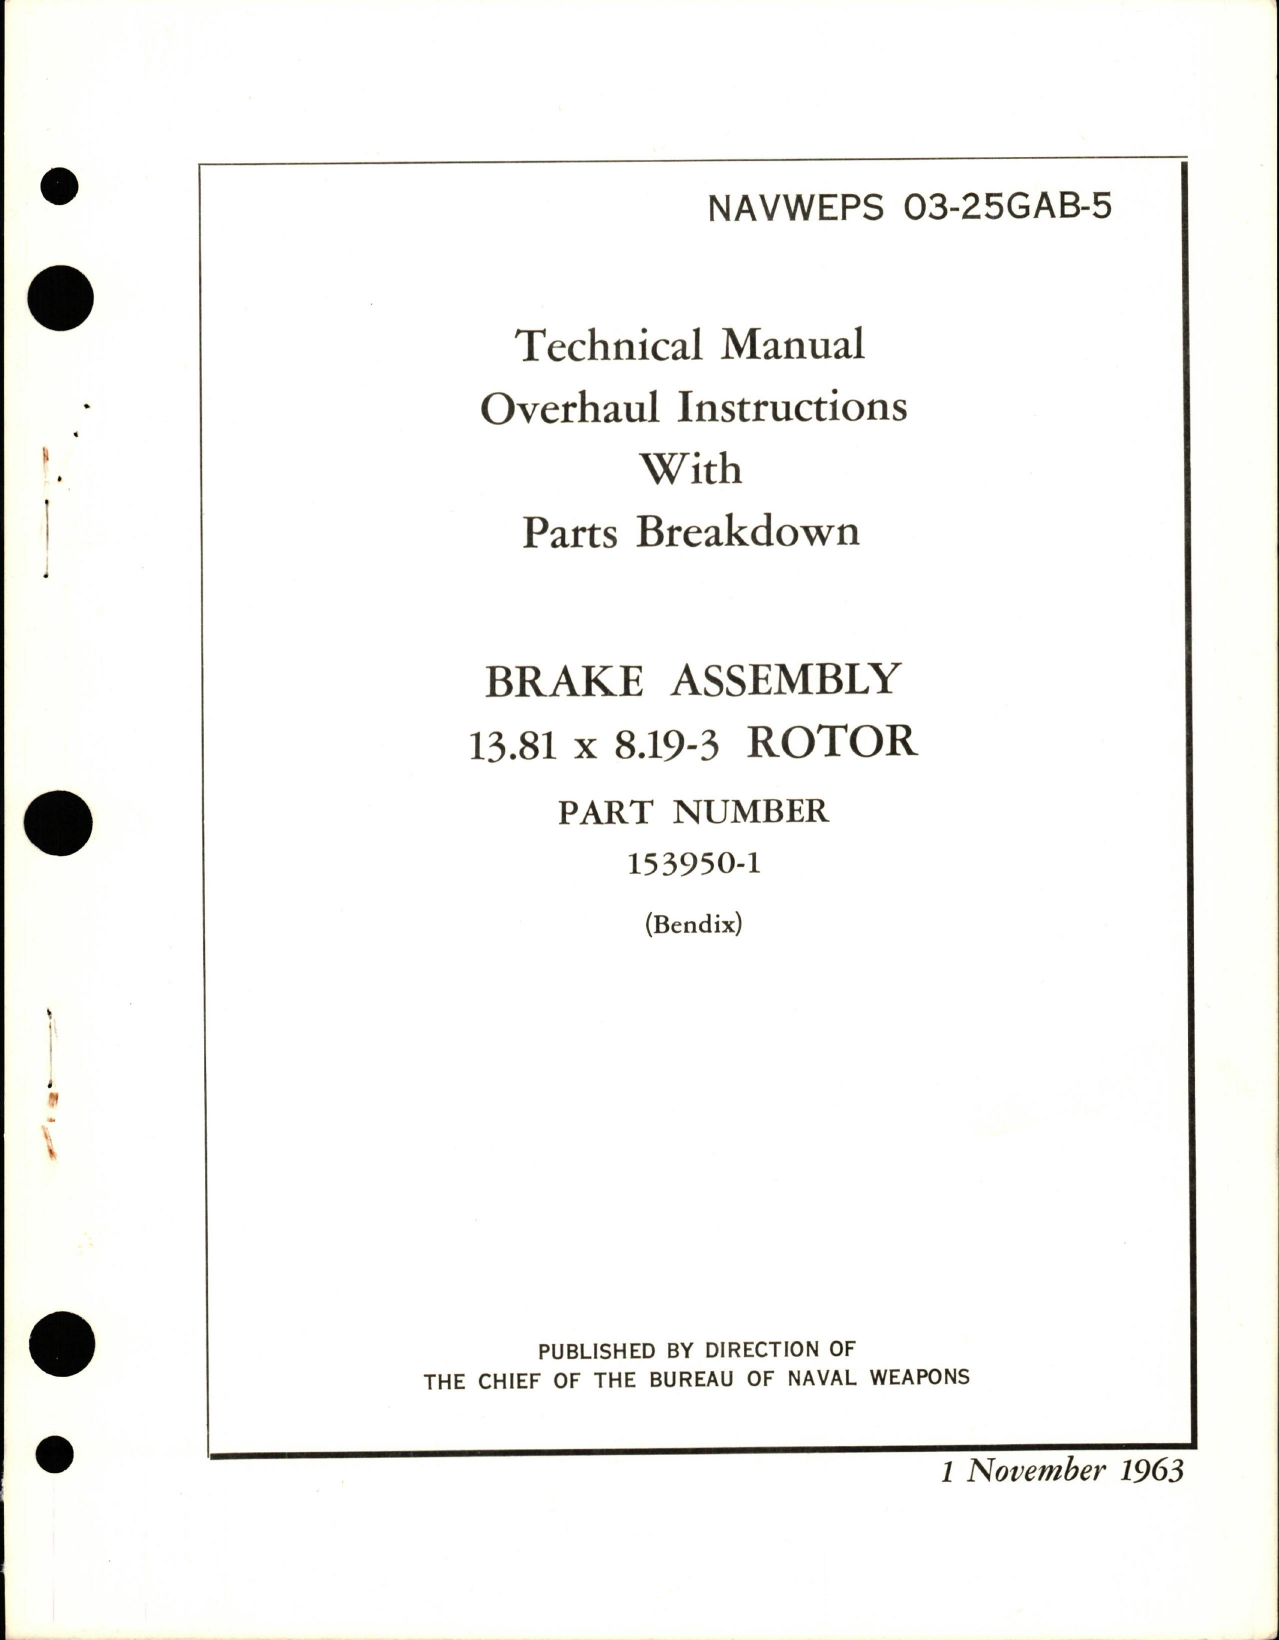 Sample page 1 from AirCorps Library document: Overhaul Instructions with Parts Breakdown for Brake Assembly - 13.81x8.19-3 Rotor - Part 153950-1